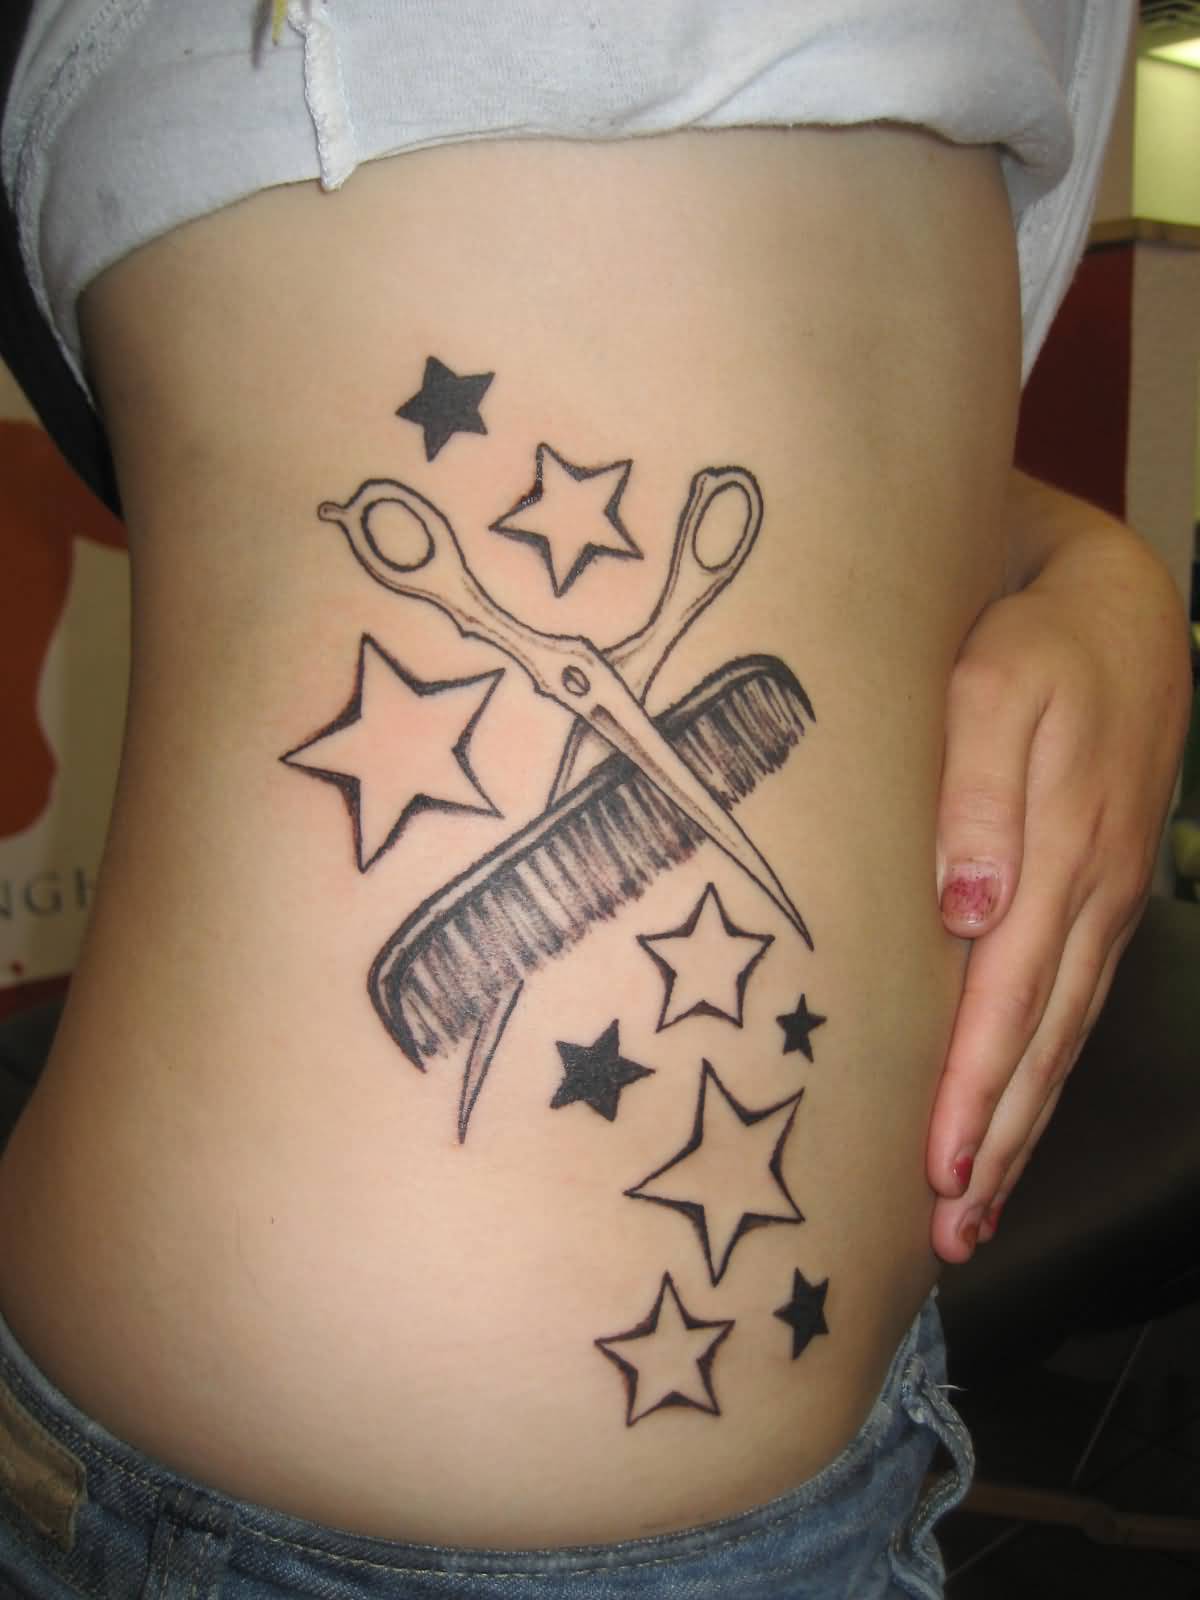 Star Shape With Hair Comb And Scissor Tattoo On Rib